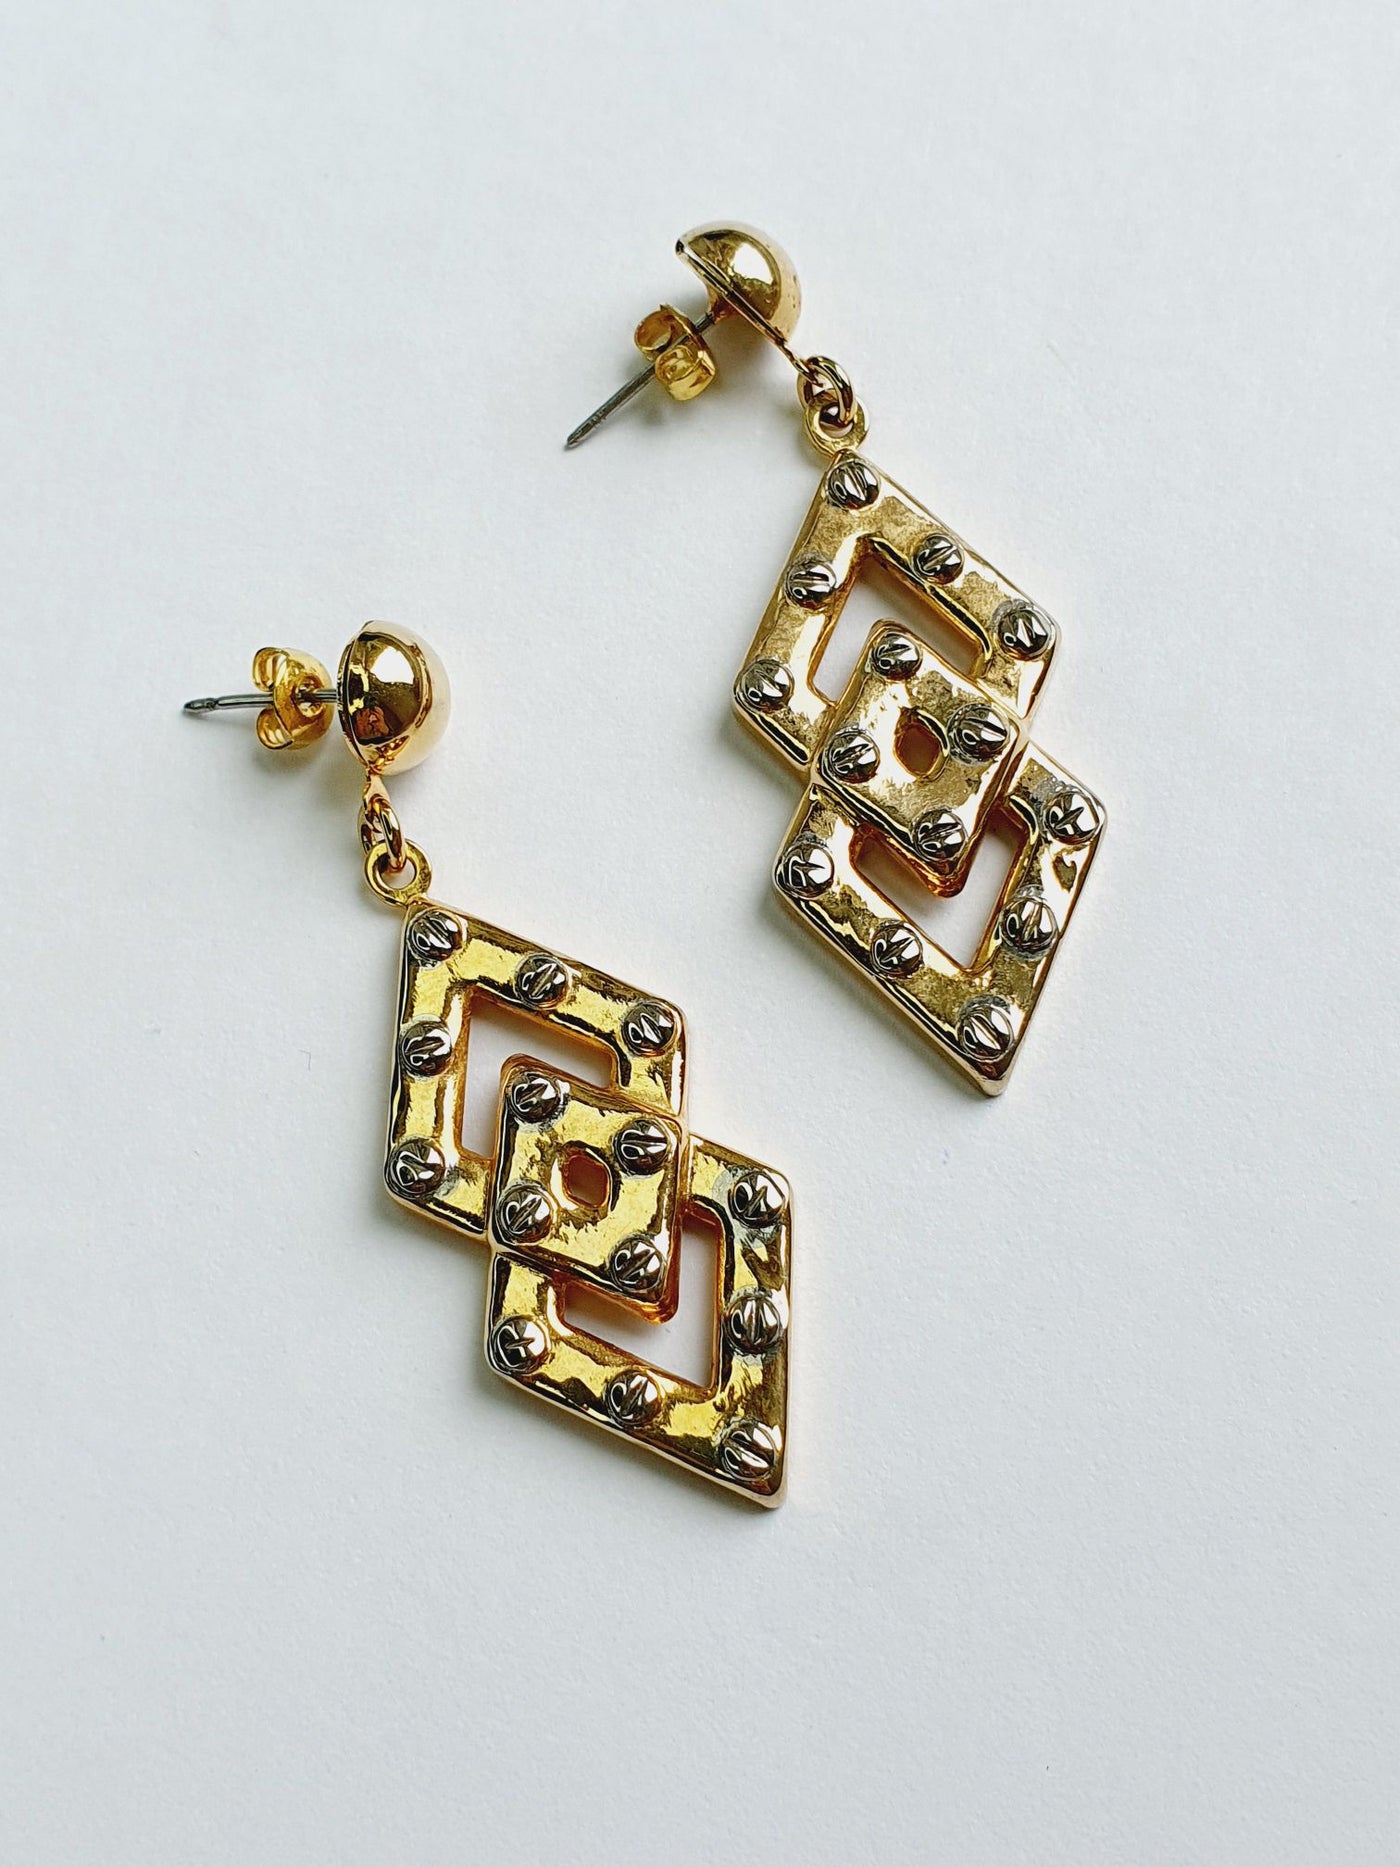 Vintage Gold Plated Statement Drop Earrings